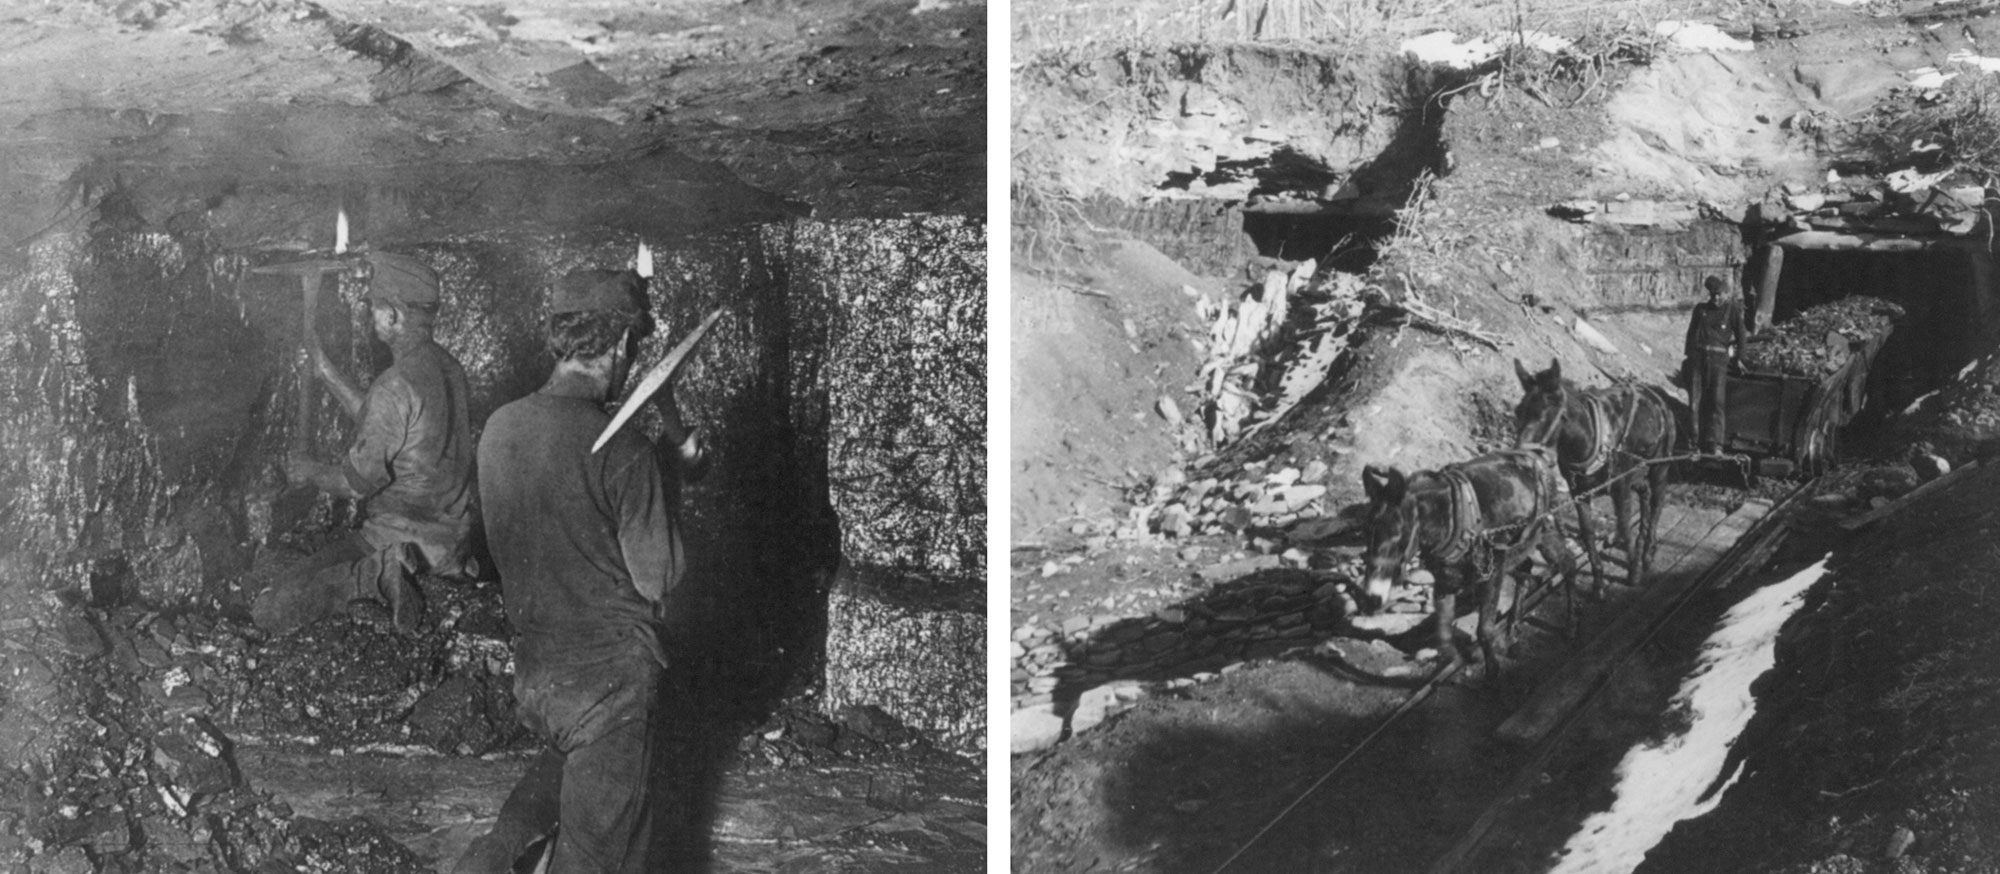 2-panel figure showing black-and-white photos of the Starkville coal mines, 1906. Panel 1: Photo of two men in a coal mine. Photo shows that the mine has a low ceiling, and the men are kneeling to dig coal using picks. Each man wears a hat with a headlamp. Panel 2: A man rides a wagon full of coal being pulled out the the entrance to an underground coal mine by two mules or donkeys.